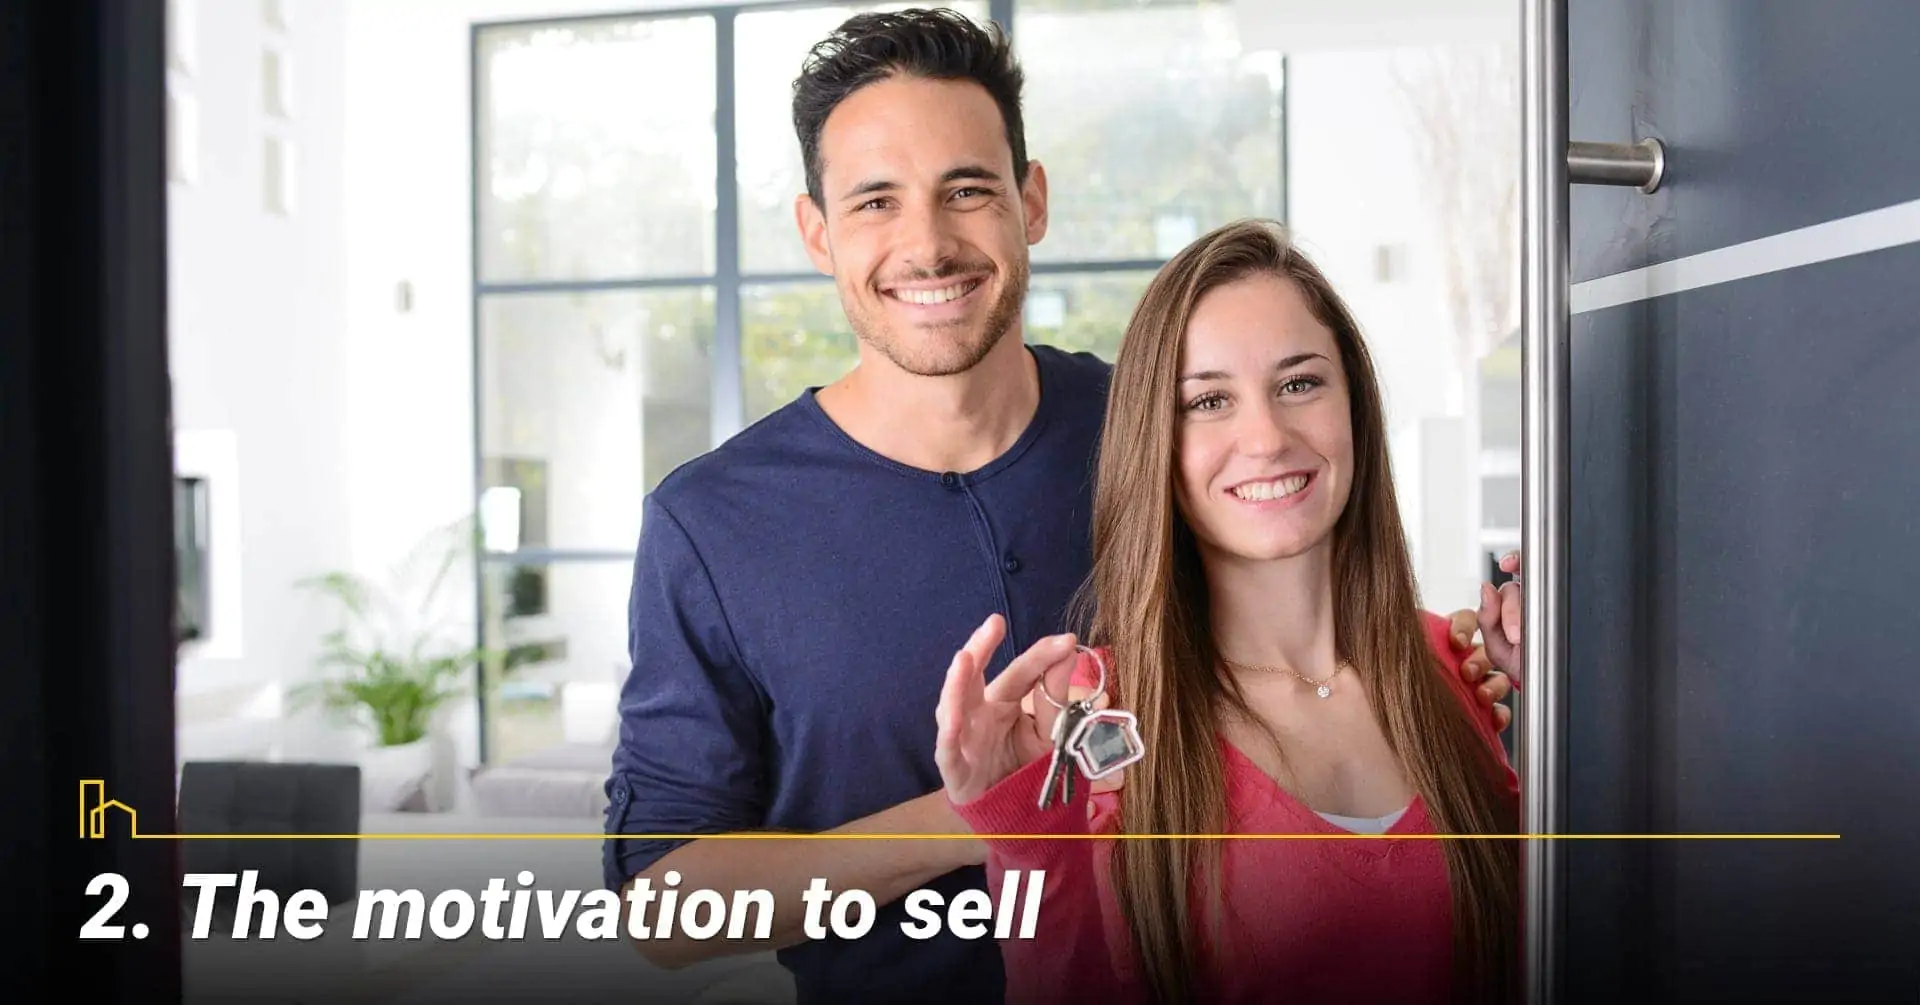 The motivation to sell, reasons to sell your house